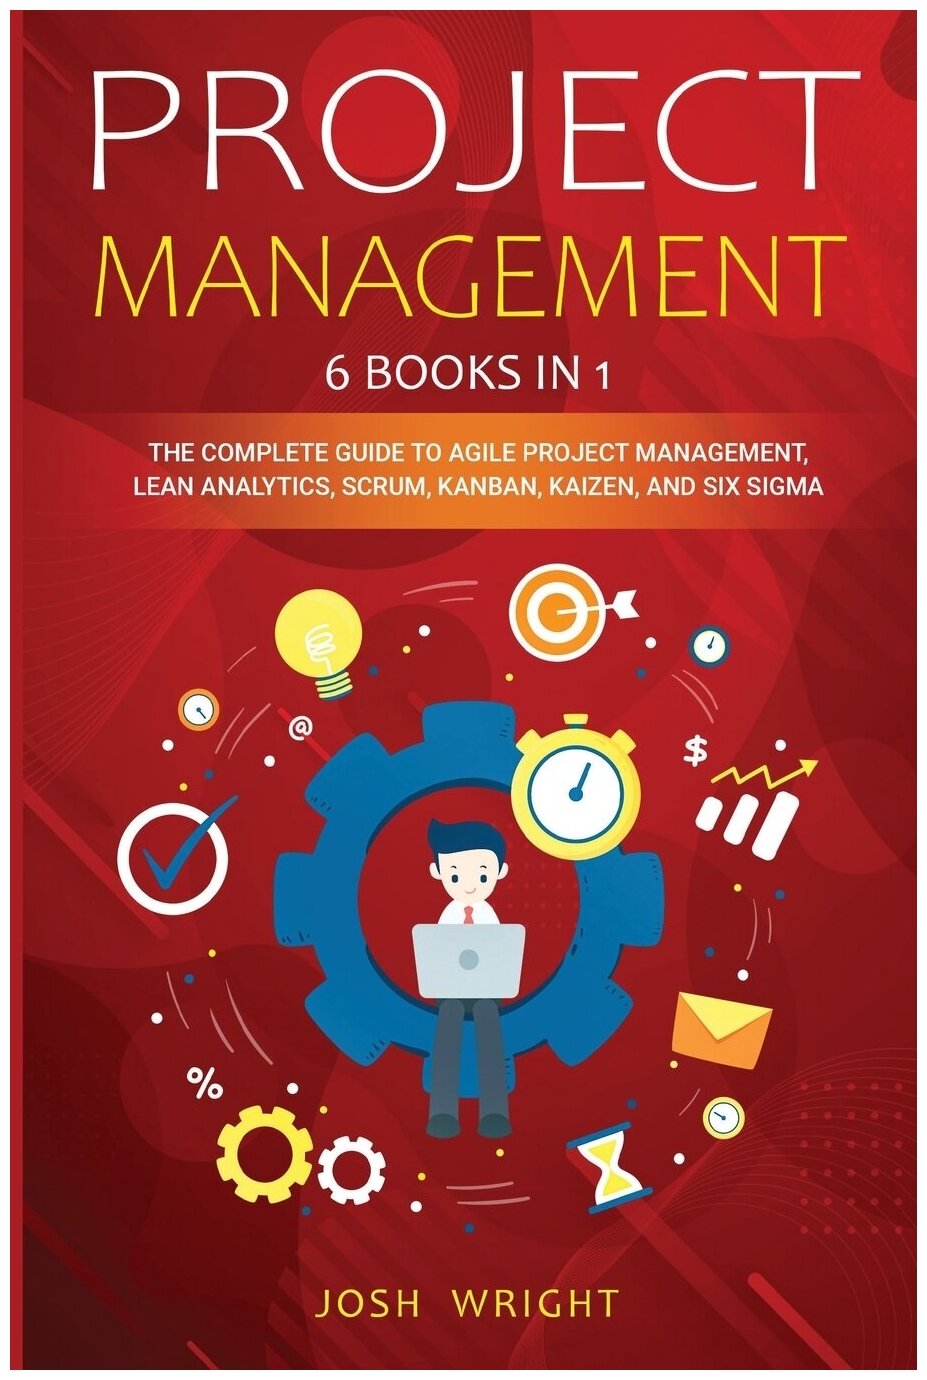 Project Management. 6 Books in 1: The Complete Guide to Agile Project Management, Lean Analytics, Scrum, Kanban, Kaizen, and Six Sigma